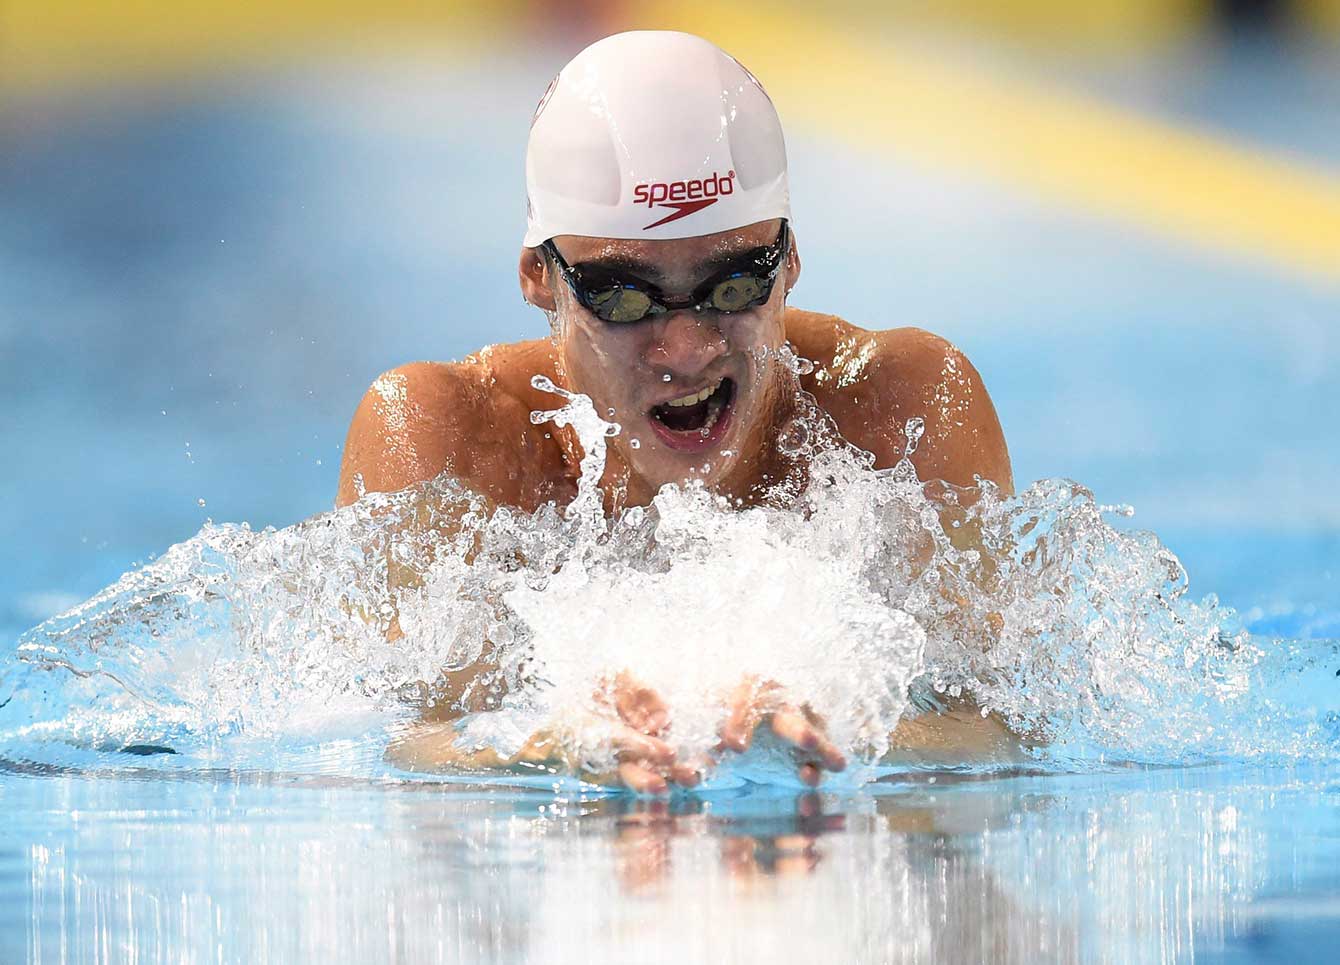 Edmonton's Richard Funk swims in the 200m breaststroke final at the Pan American Games.   